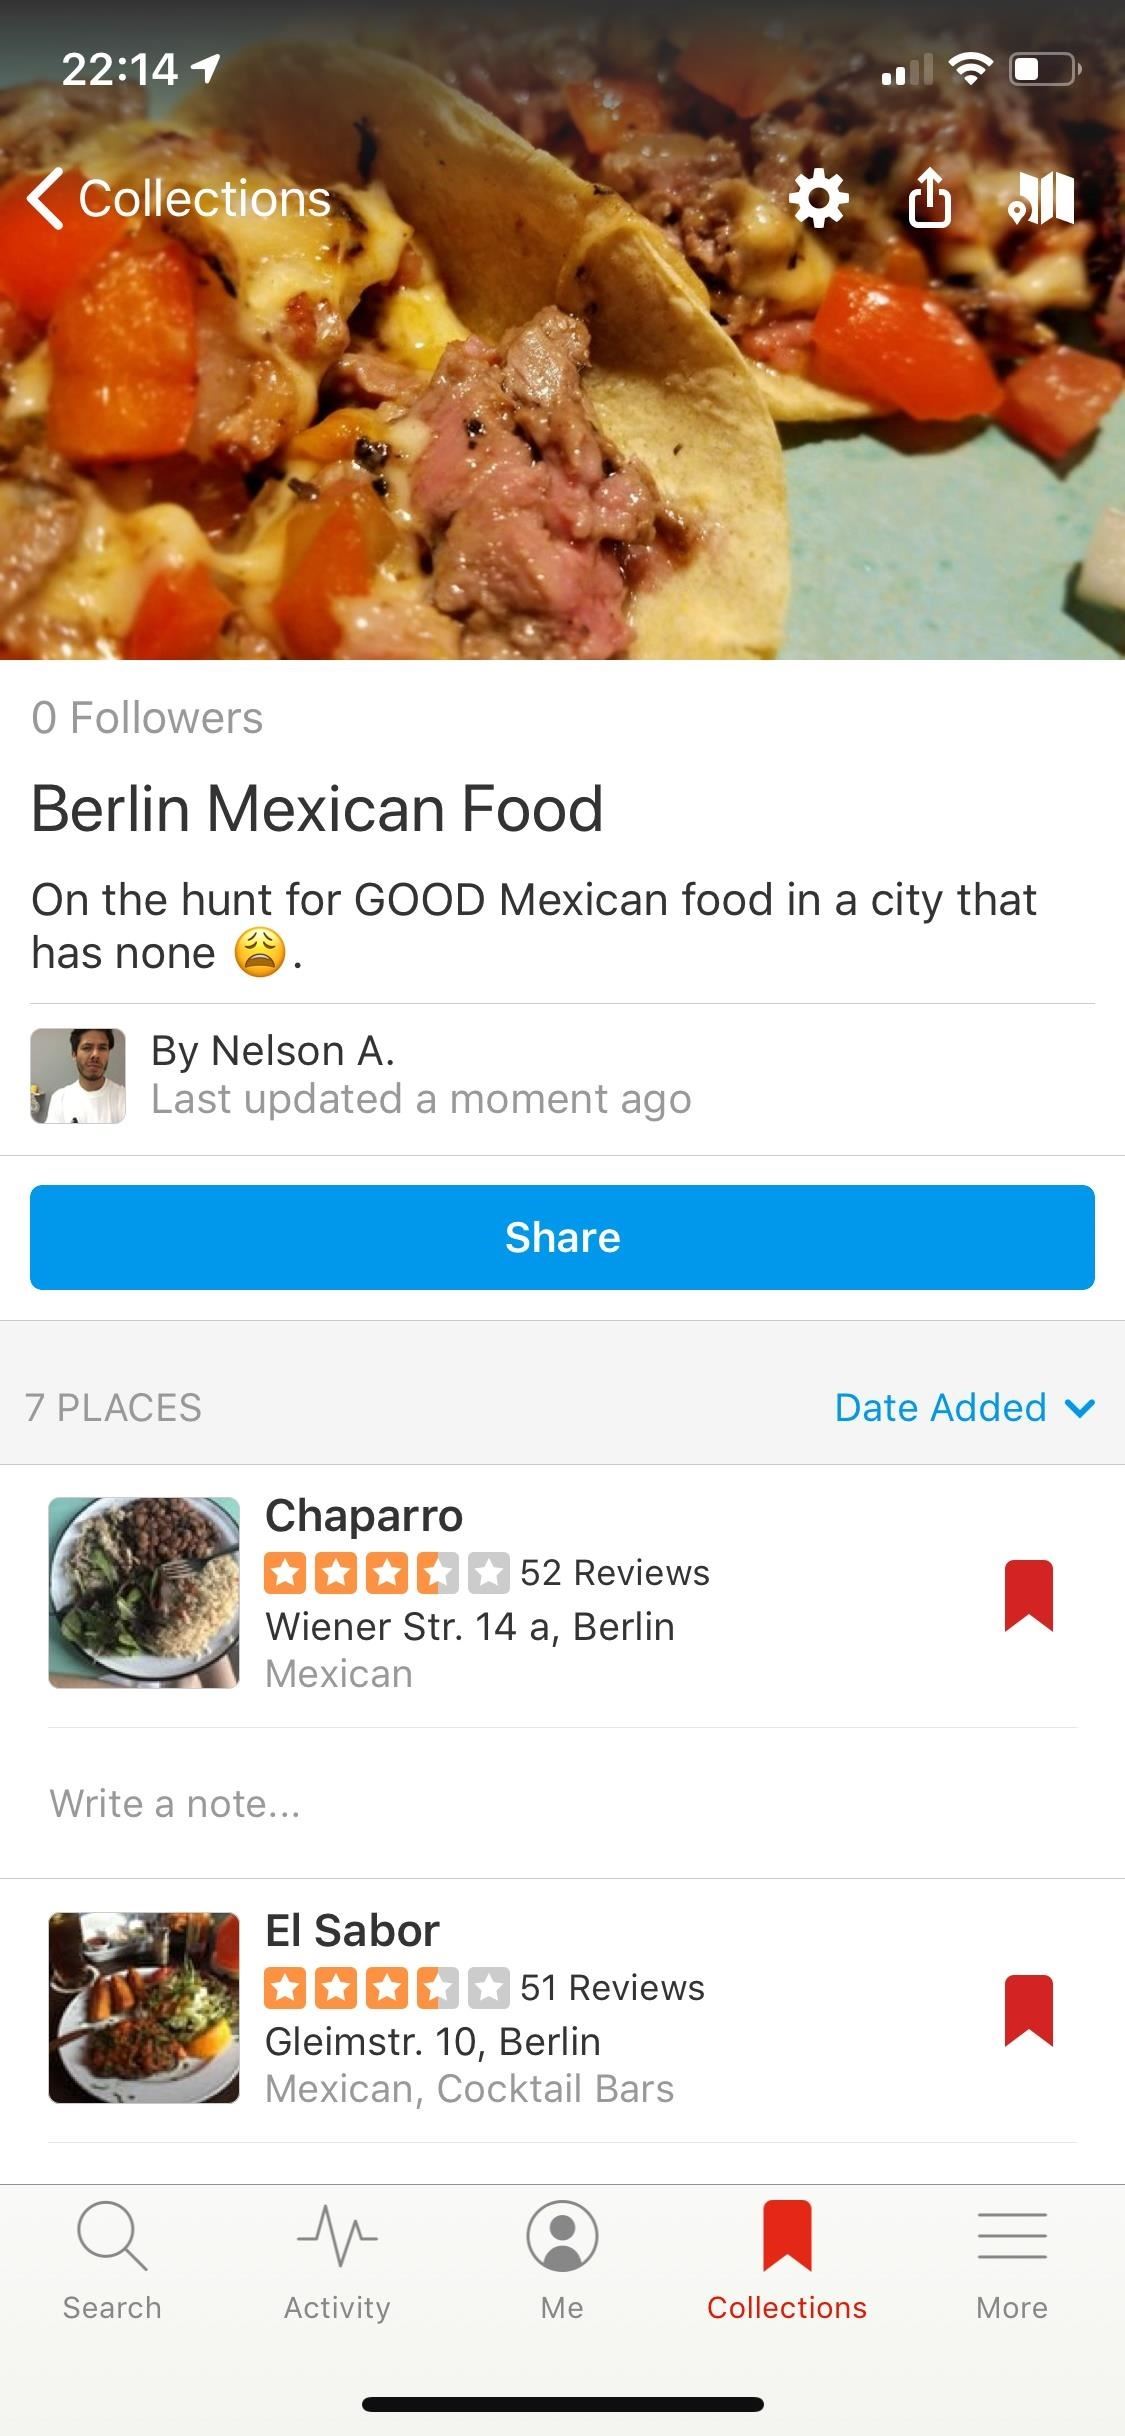 Use Yelp Collections to Find New Places & Keep Your Bookmarked Locations More Organized